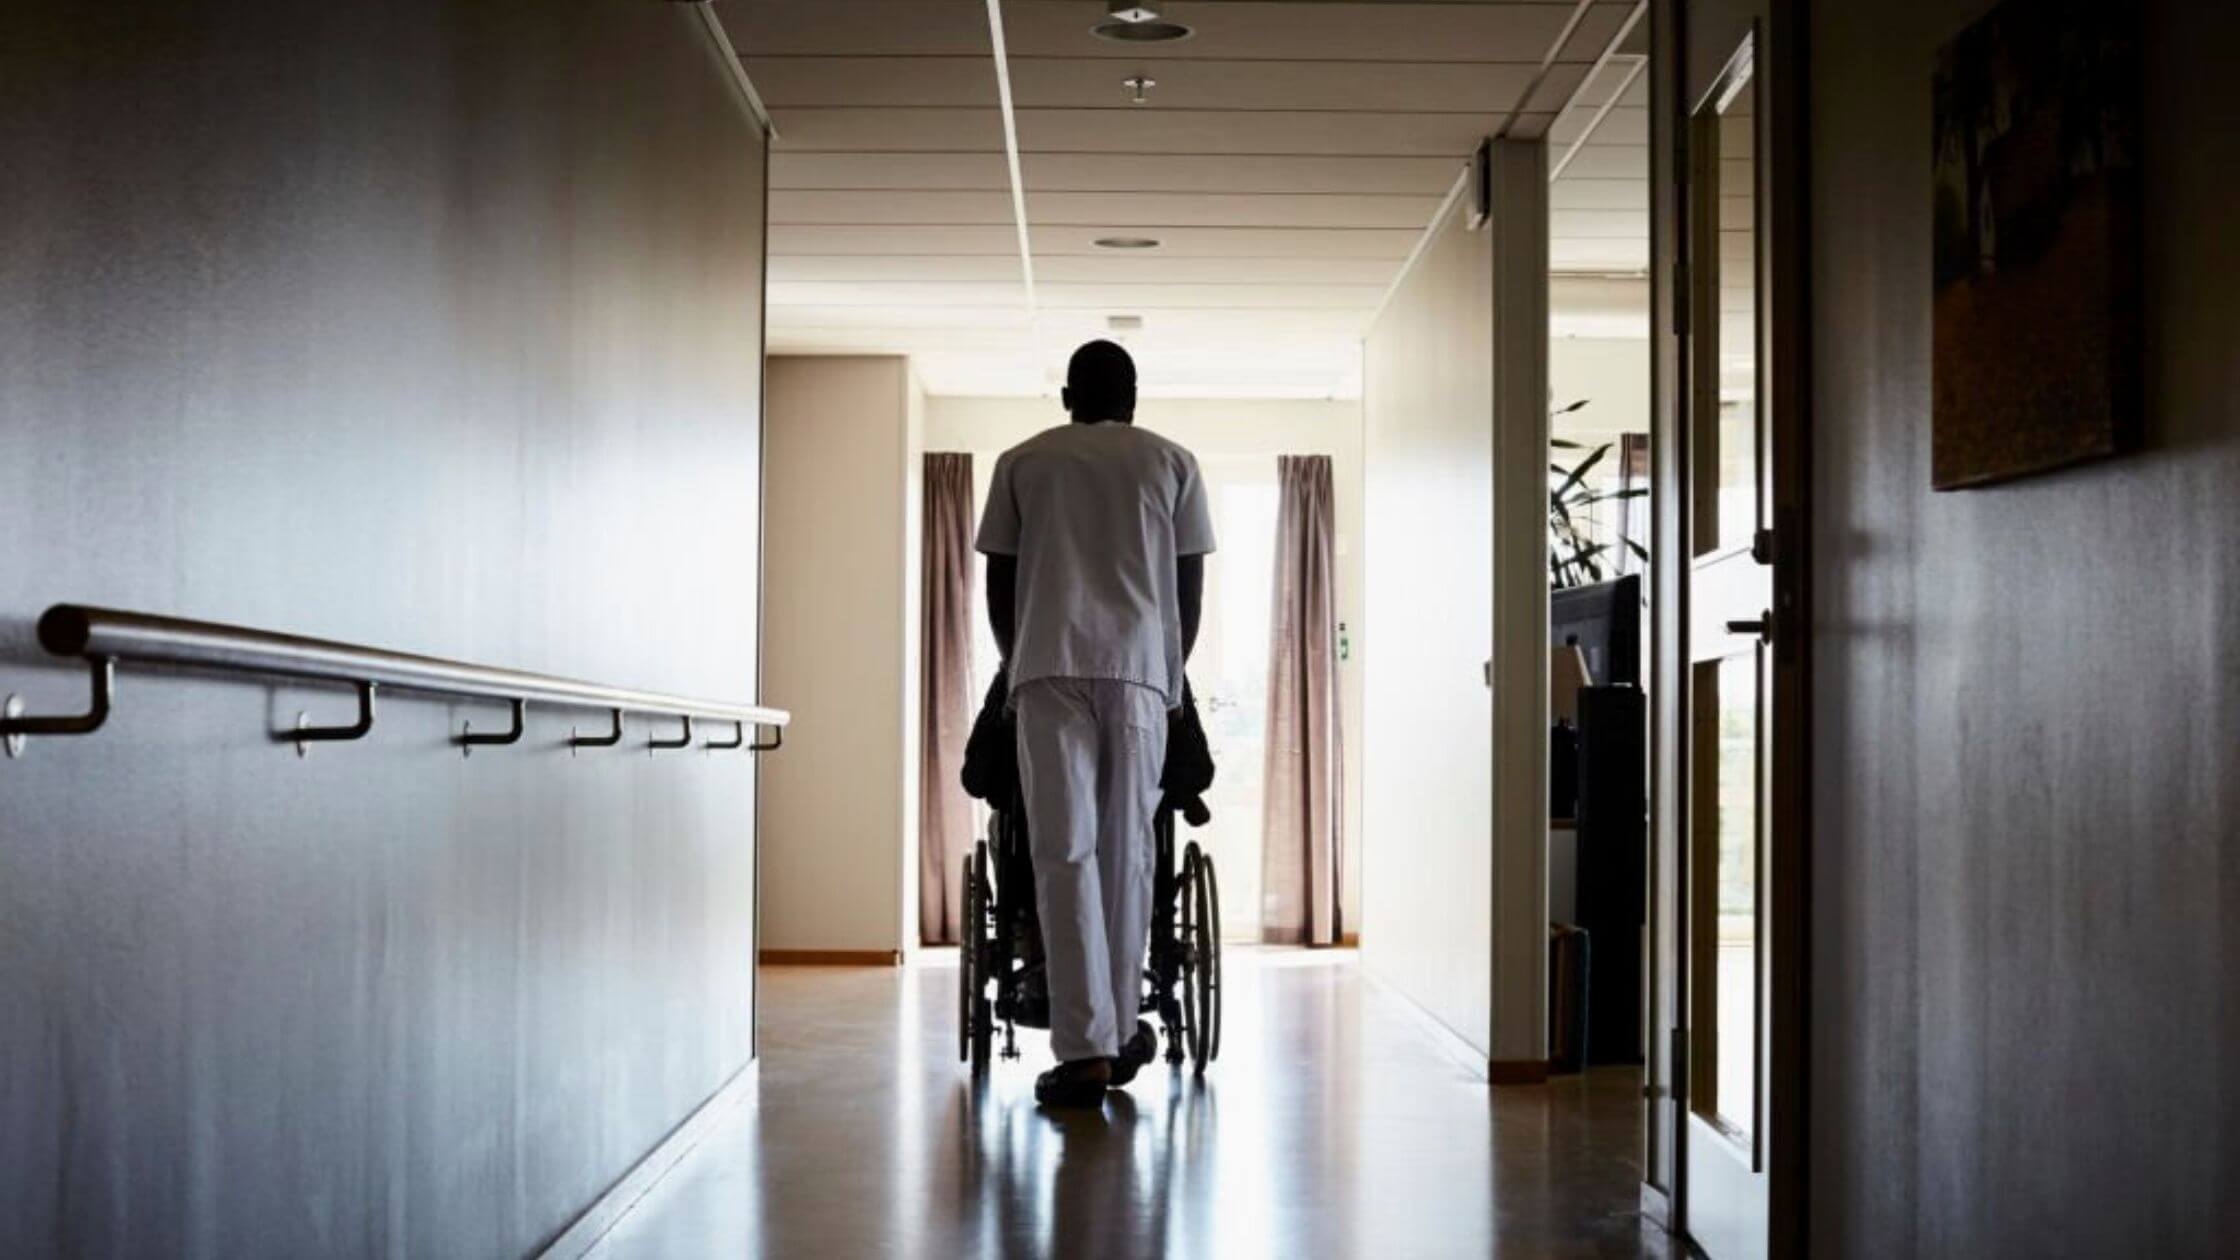 Do Not Resuscitate Orders Given For Disabled Patients